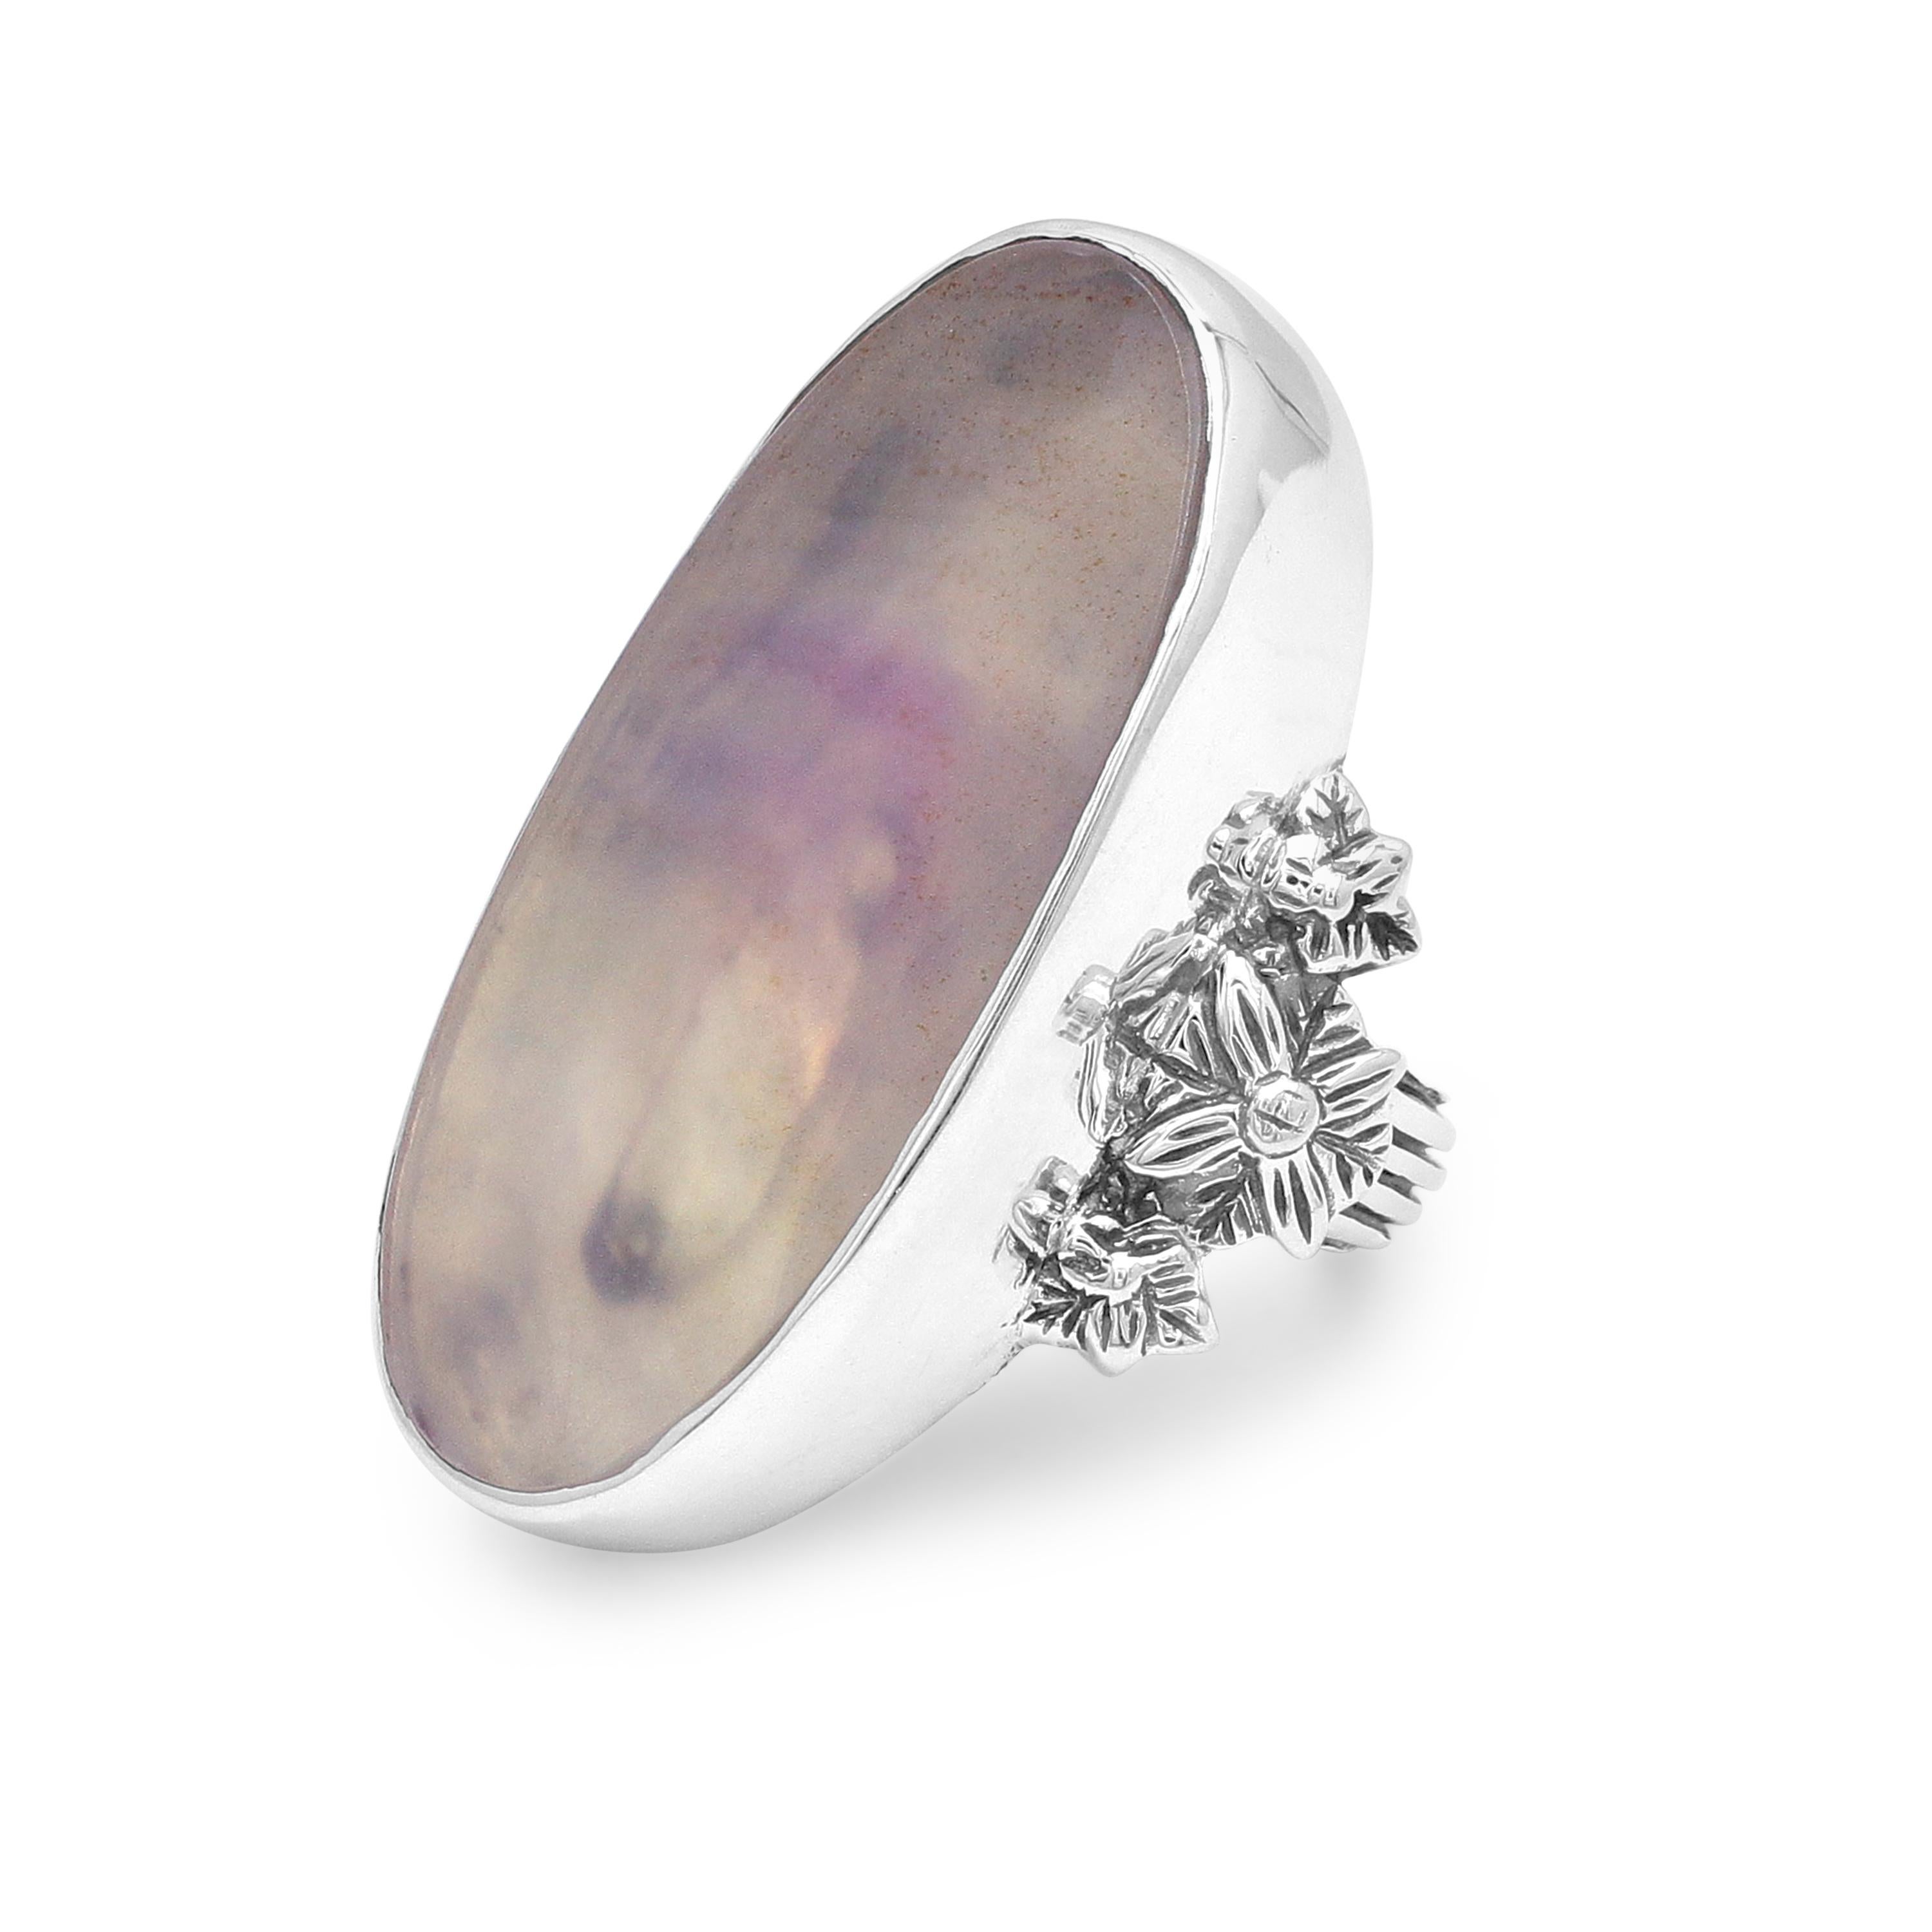 This show-stopping Stephen Dweck Sterling Silver Statement Ring features a dreamy Natural Quartz and Agate doublet 19mm x 38mm flattered with floral shanks of sterling silver. Drawing inspiration from a love of nature and passion for art, each